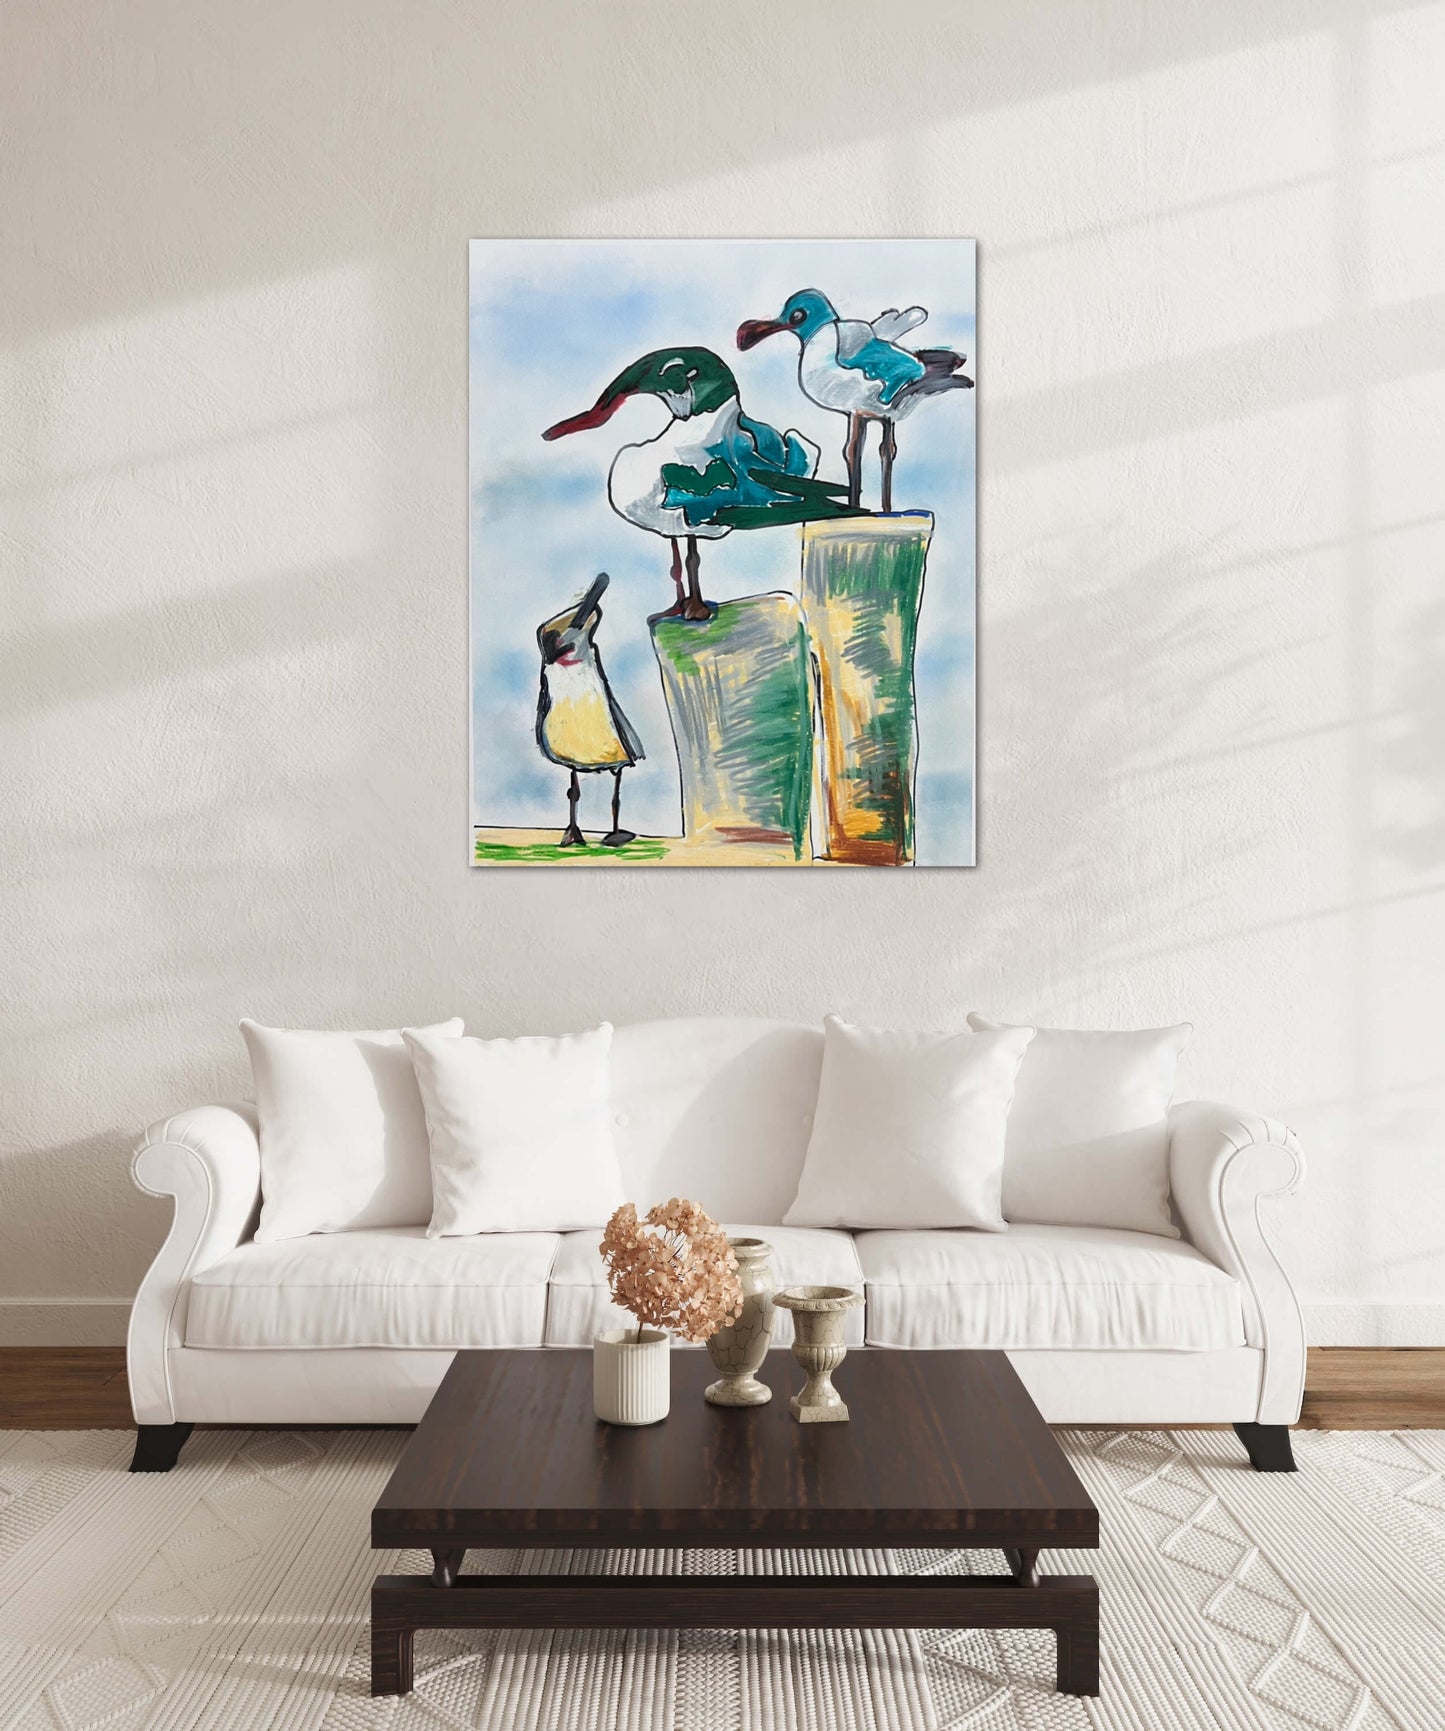 The Seagulls - Print, Poster, Stretched Canvas Print